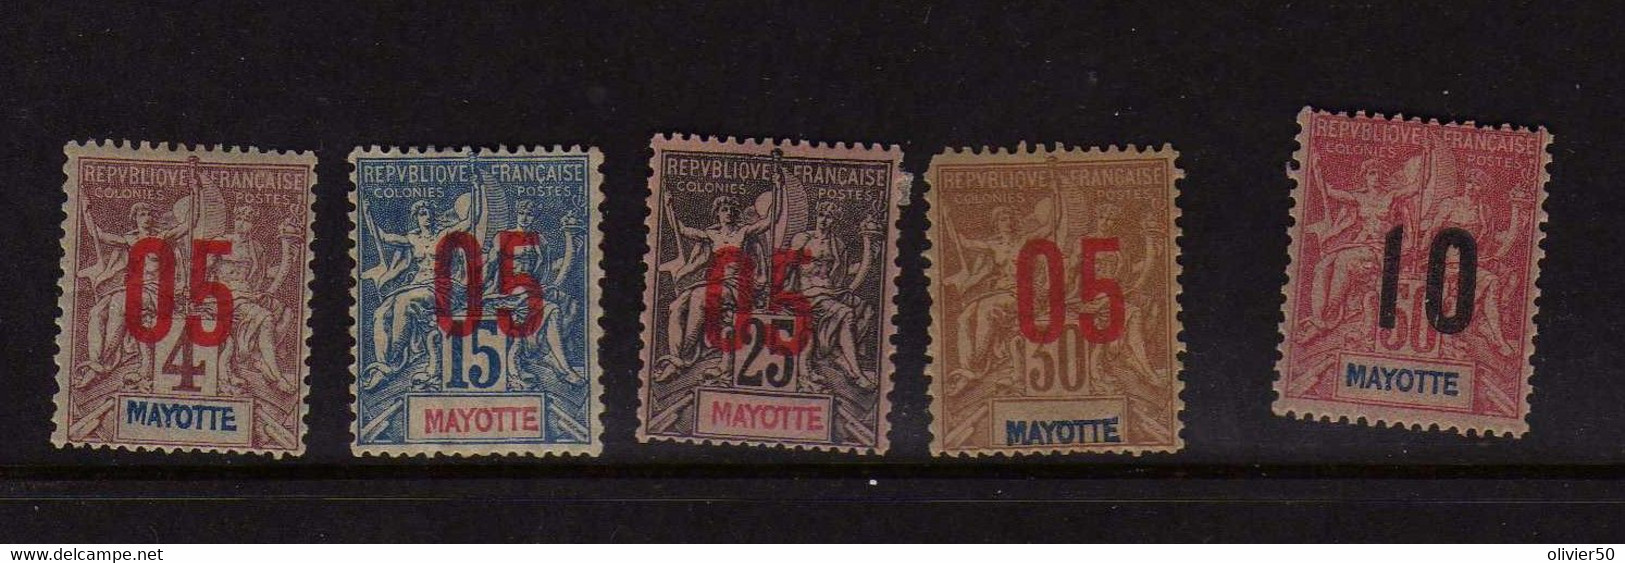 Mayotte  (1912) - Type Groupe  Surcharge  - Neufs* - MH - Ungebraucht